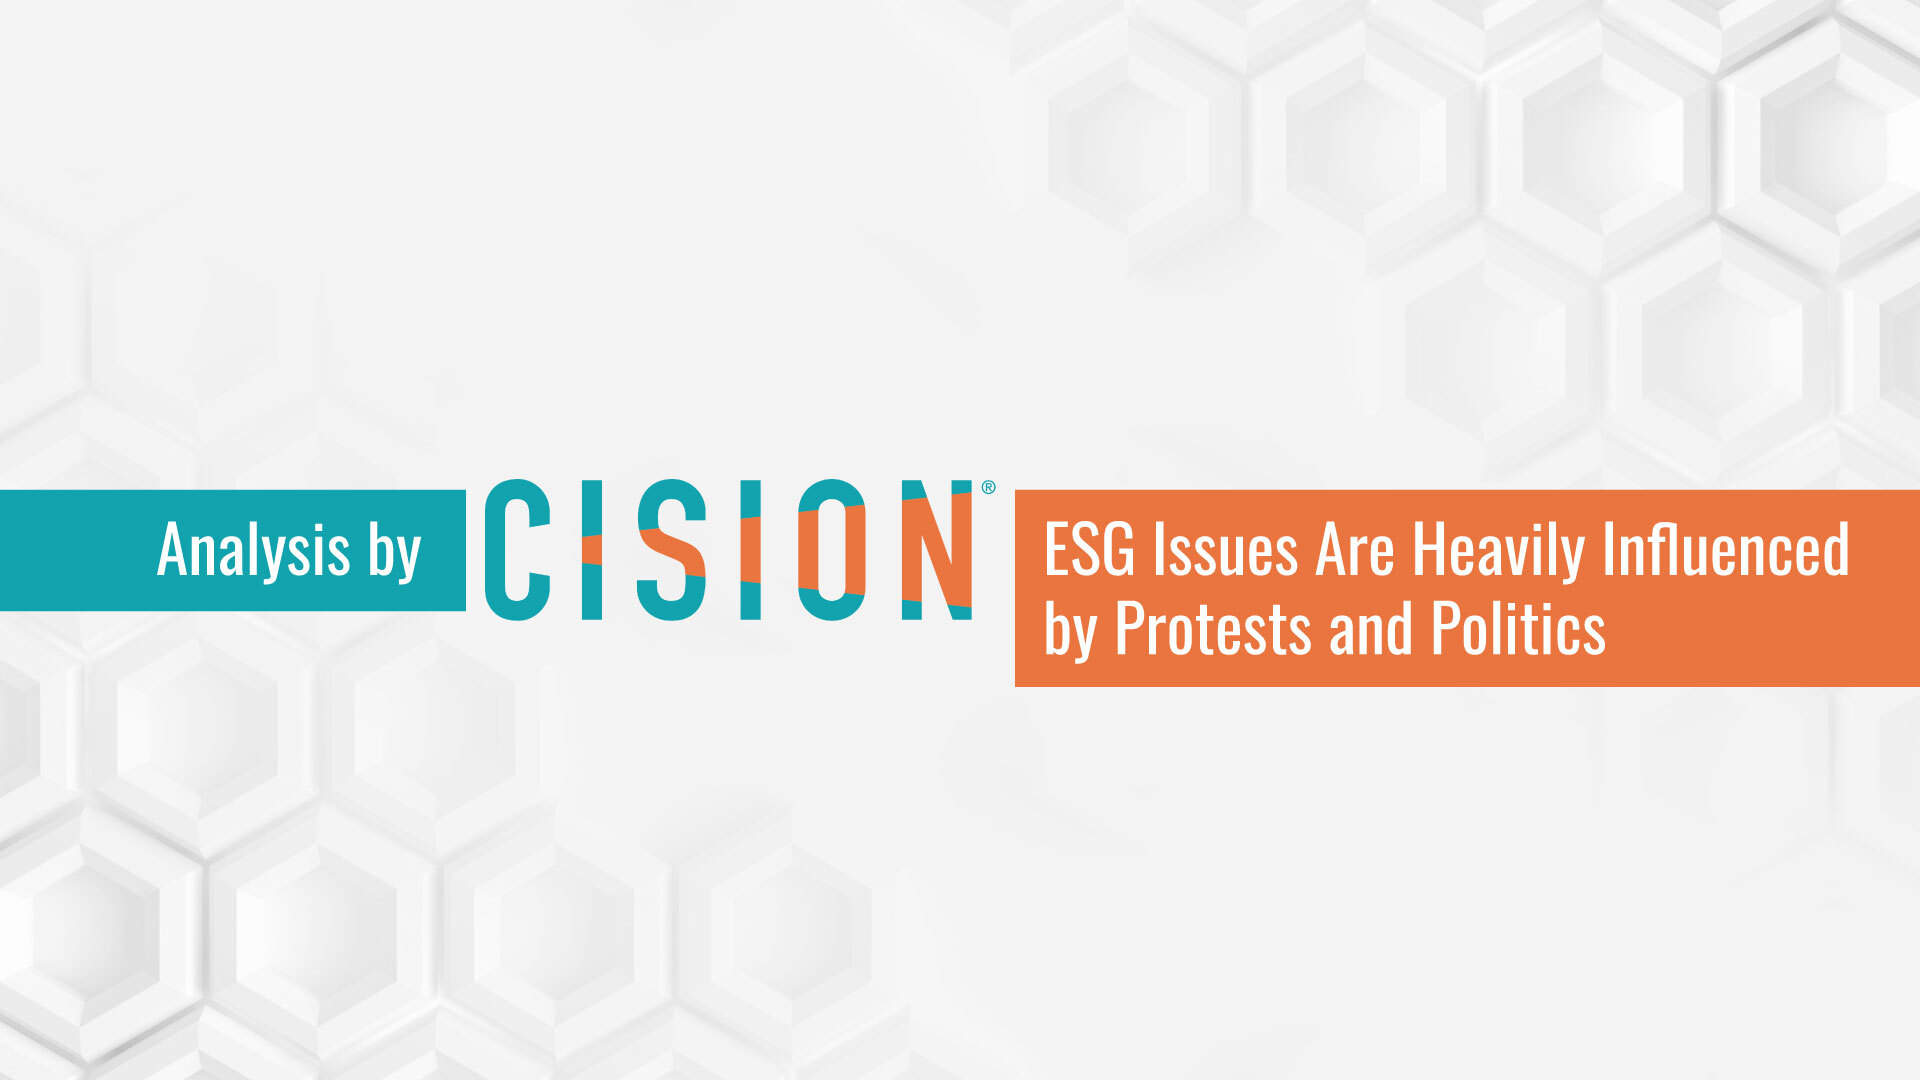 Long-term media analysis carried out by Cision shows: ESG issues are heavily influenced by protests and politics